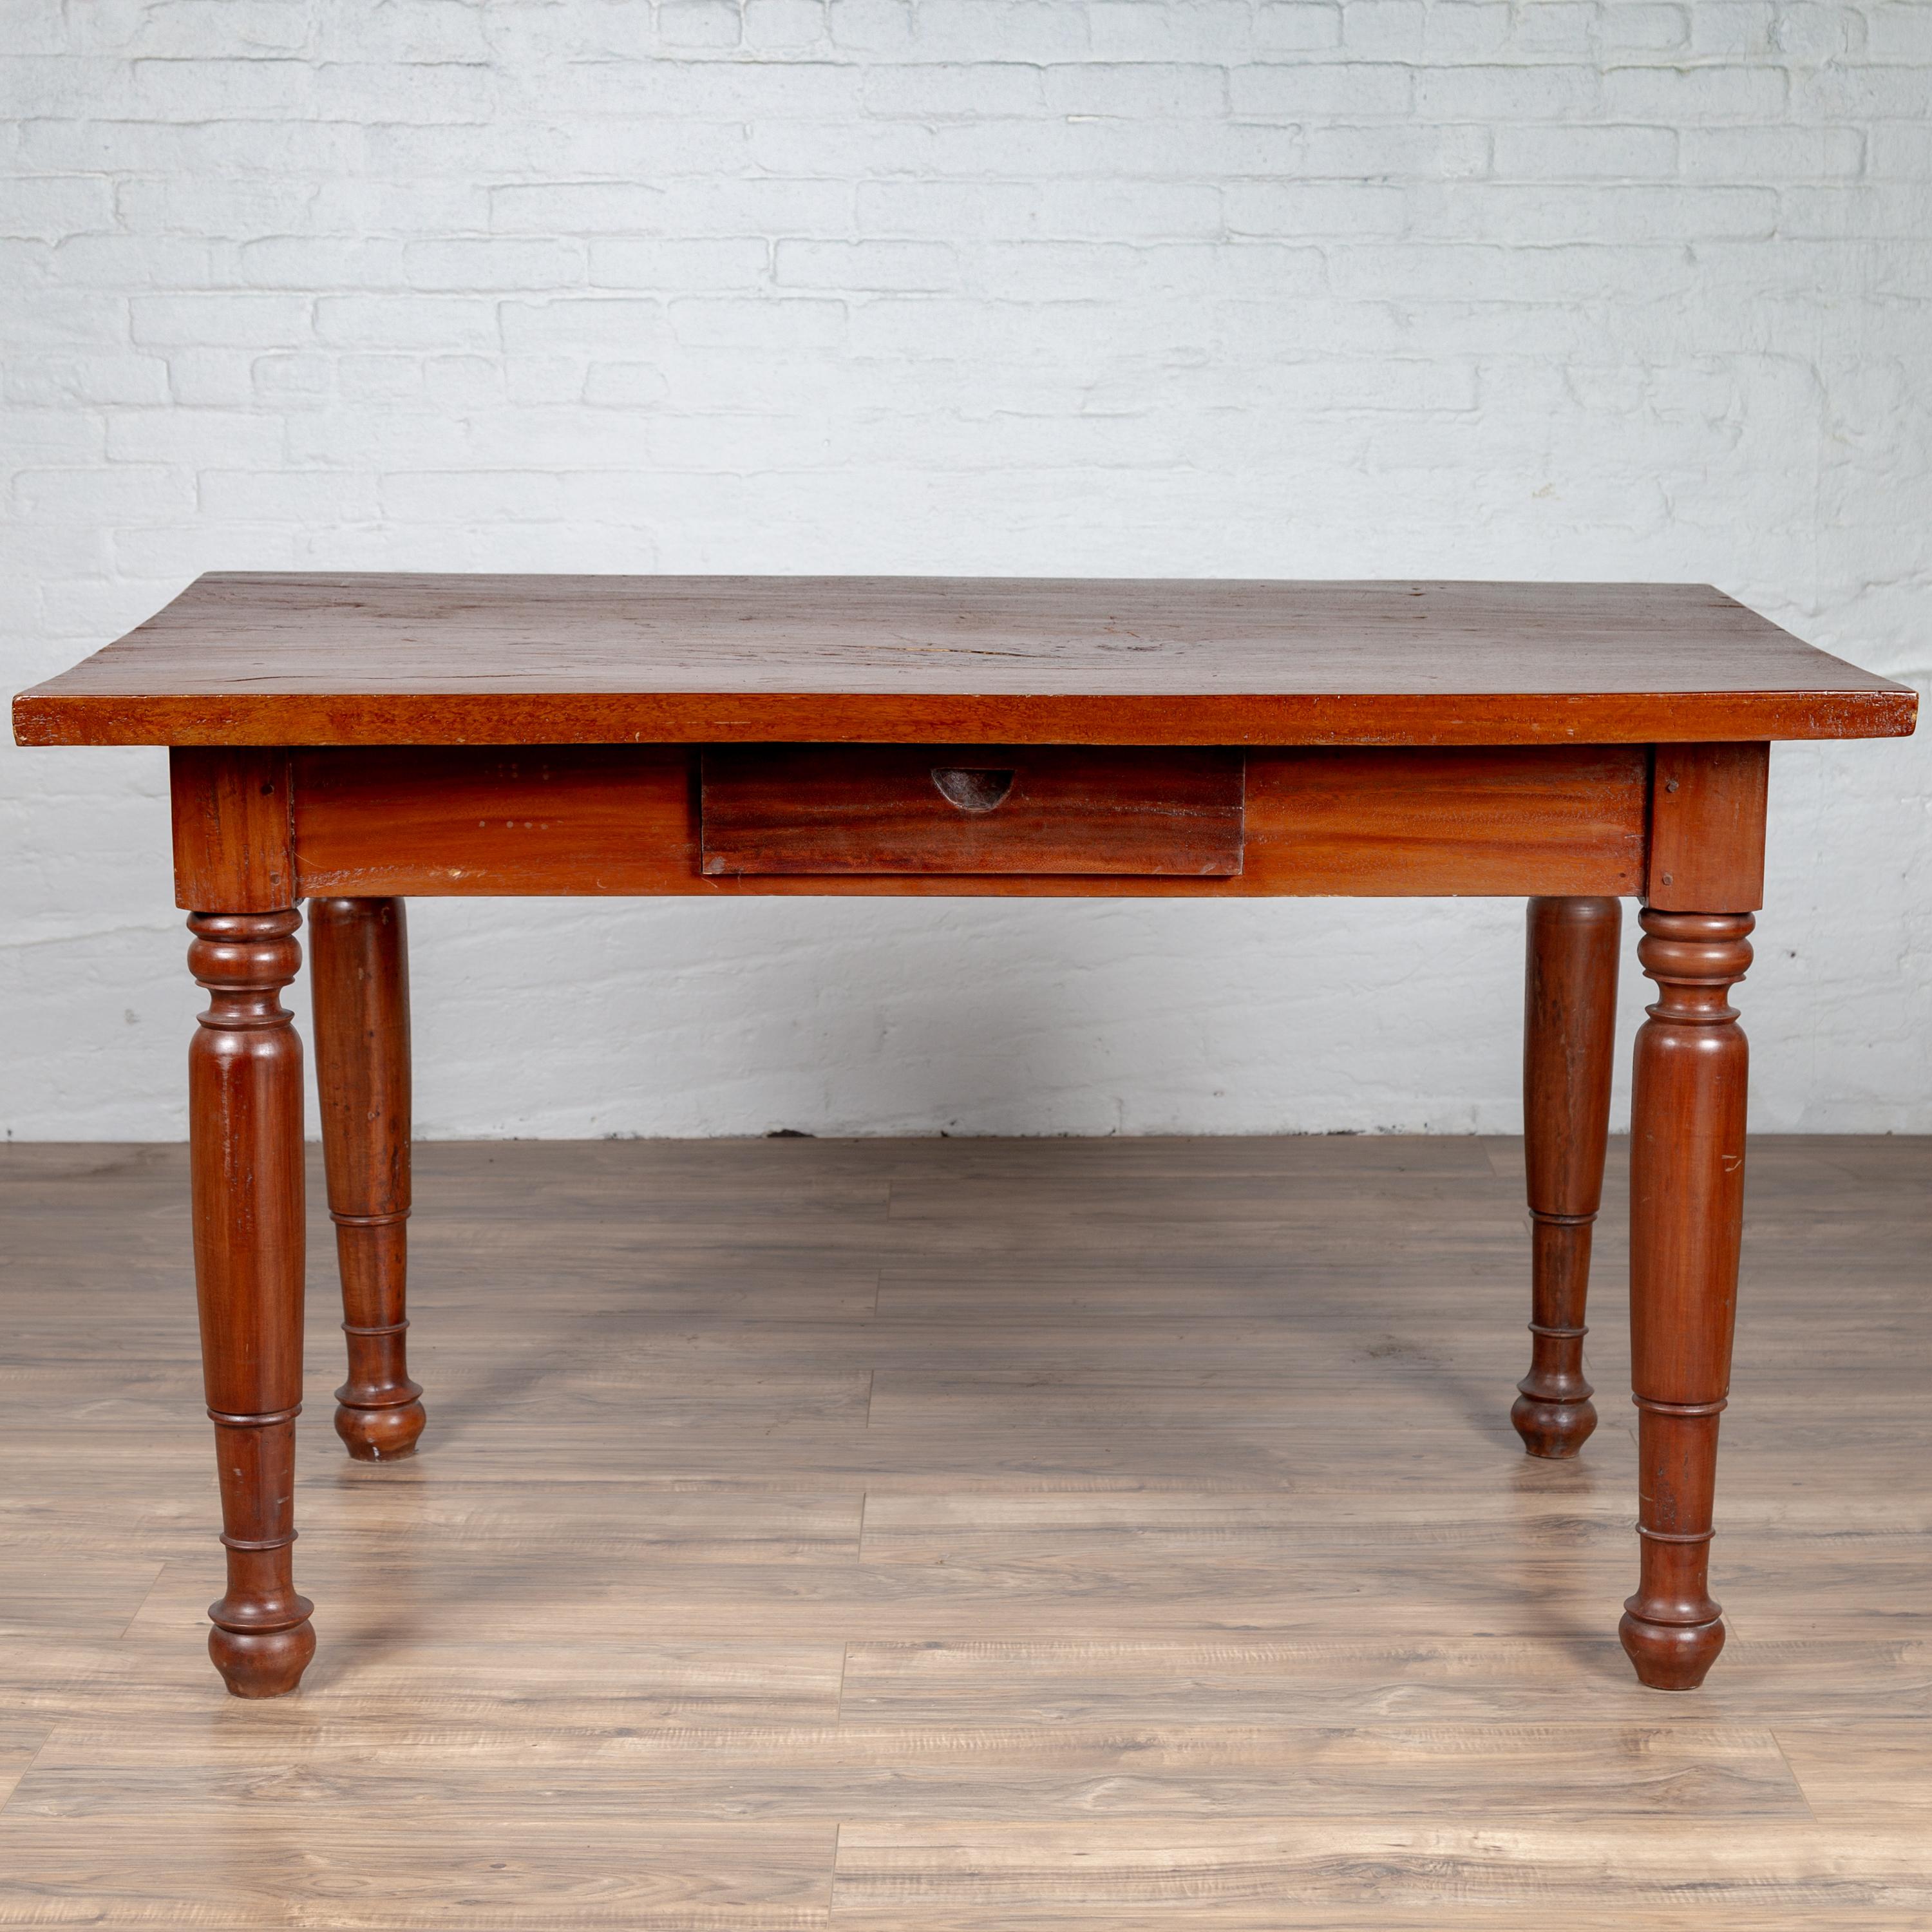 Antique Dutch Colonial Javanese Teak Desk with Single Drawer and Turned Legs In Good Condition For Sale In Yonkers, NY